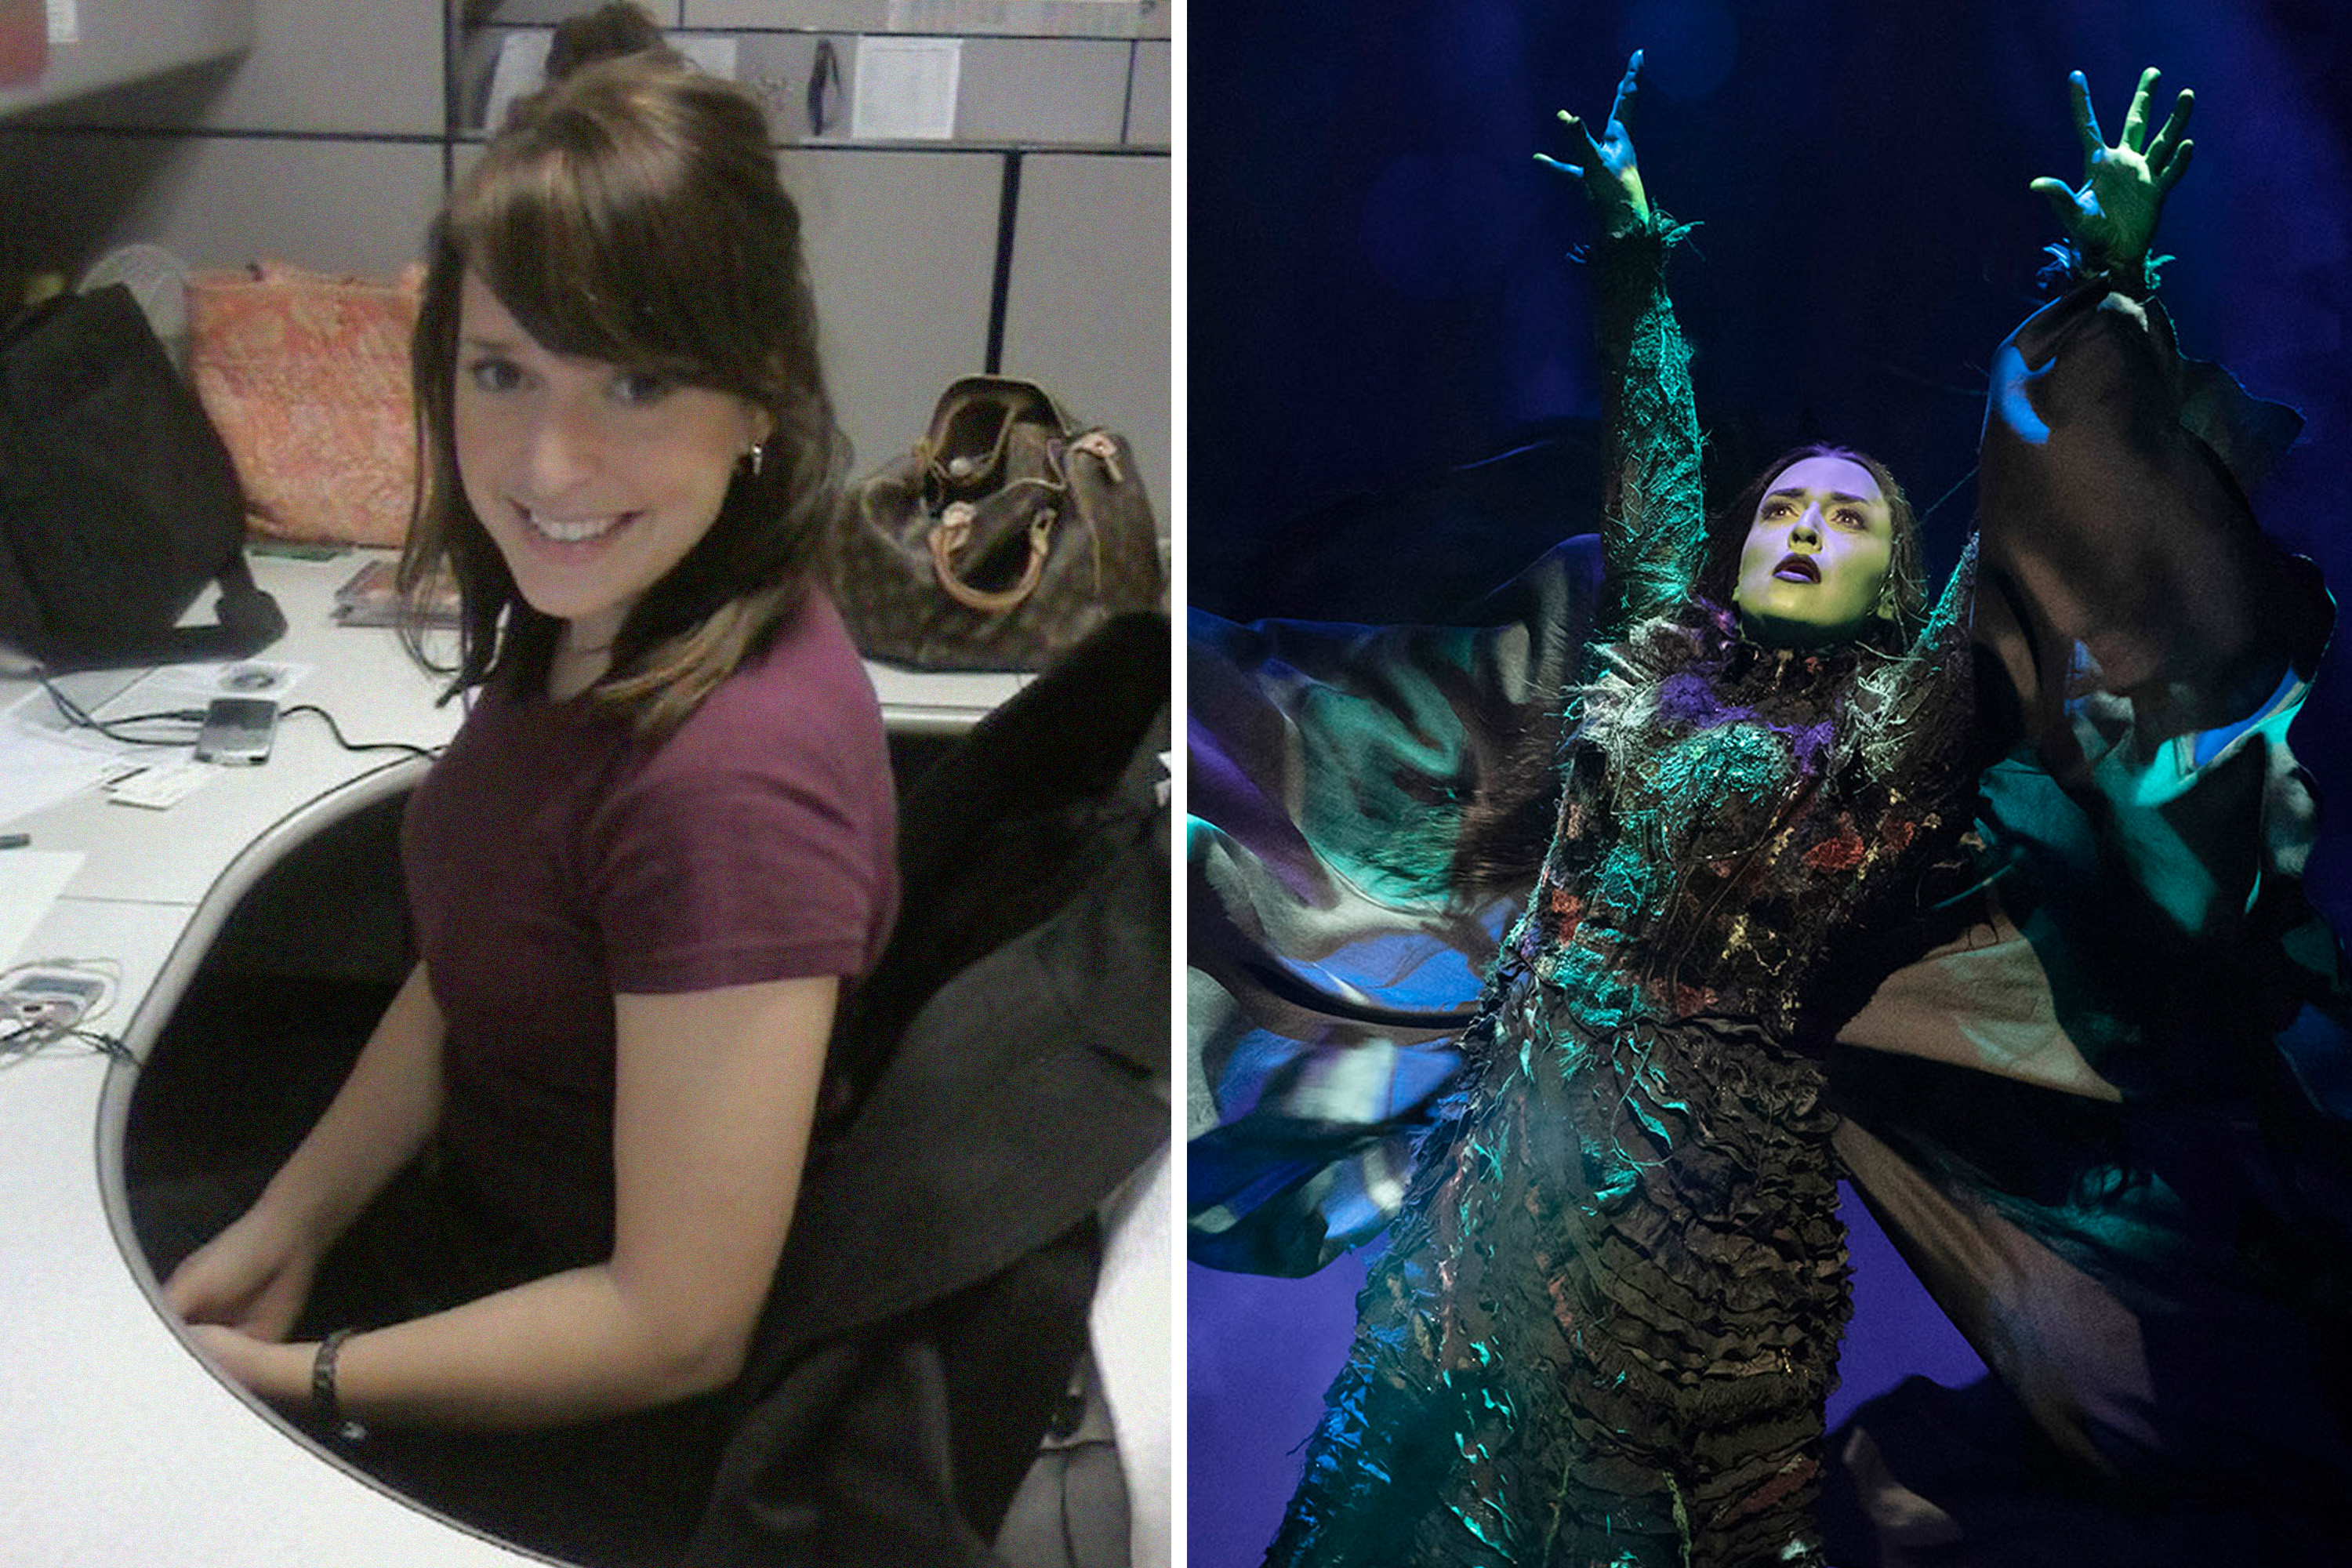 She Was Stuck in a Job That Gave Her Panic Attacks. Now She’s the Star of ‘Wicked’ on Broadway